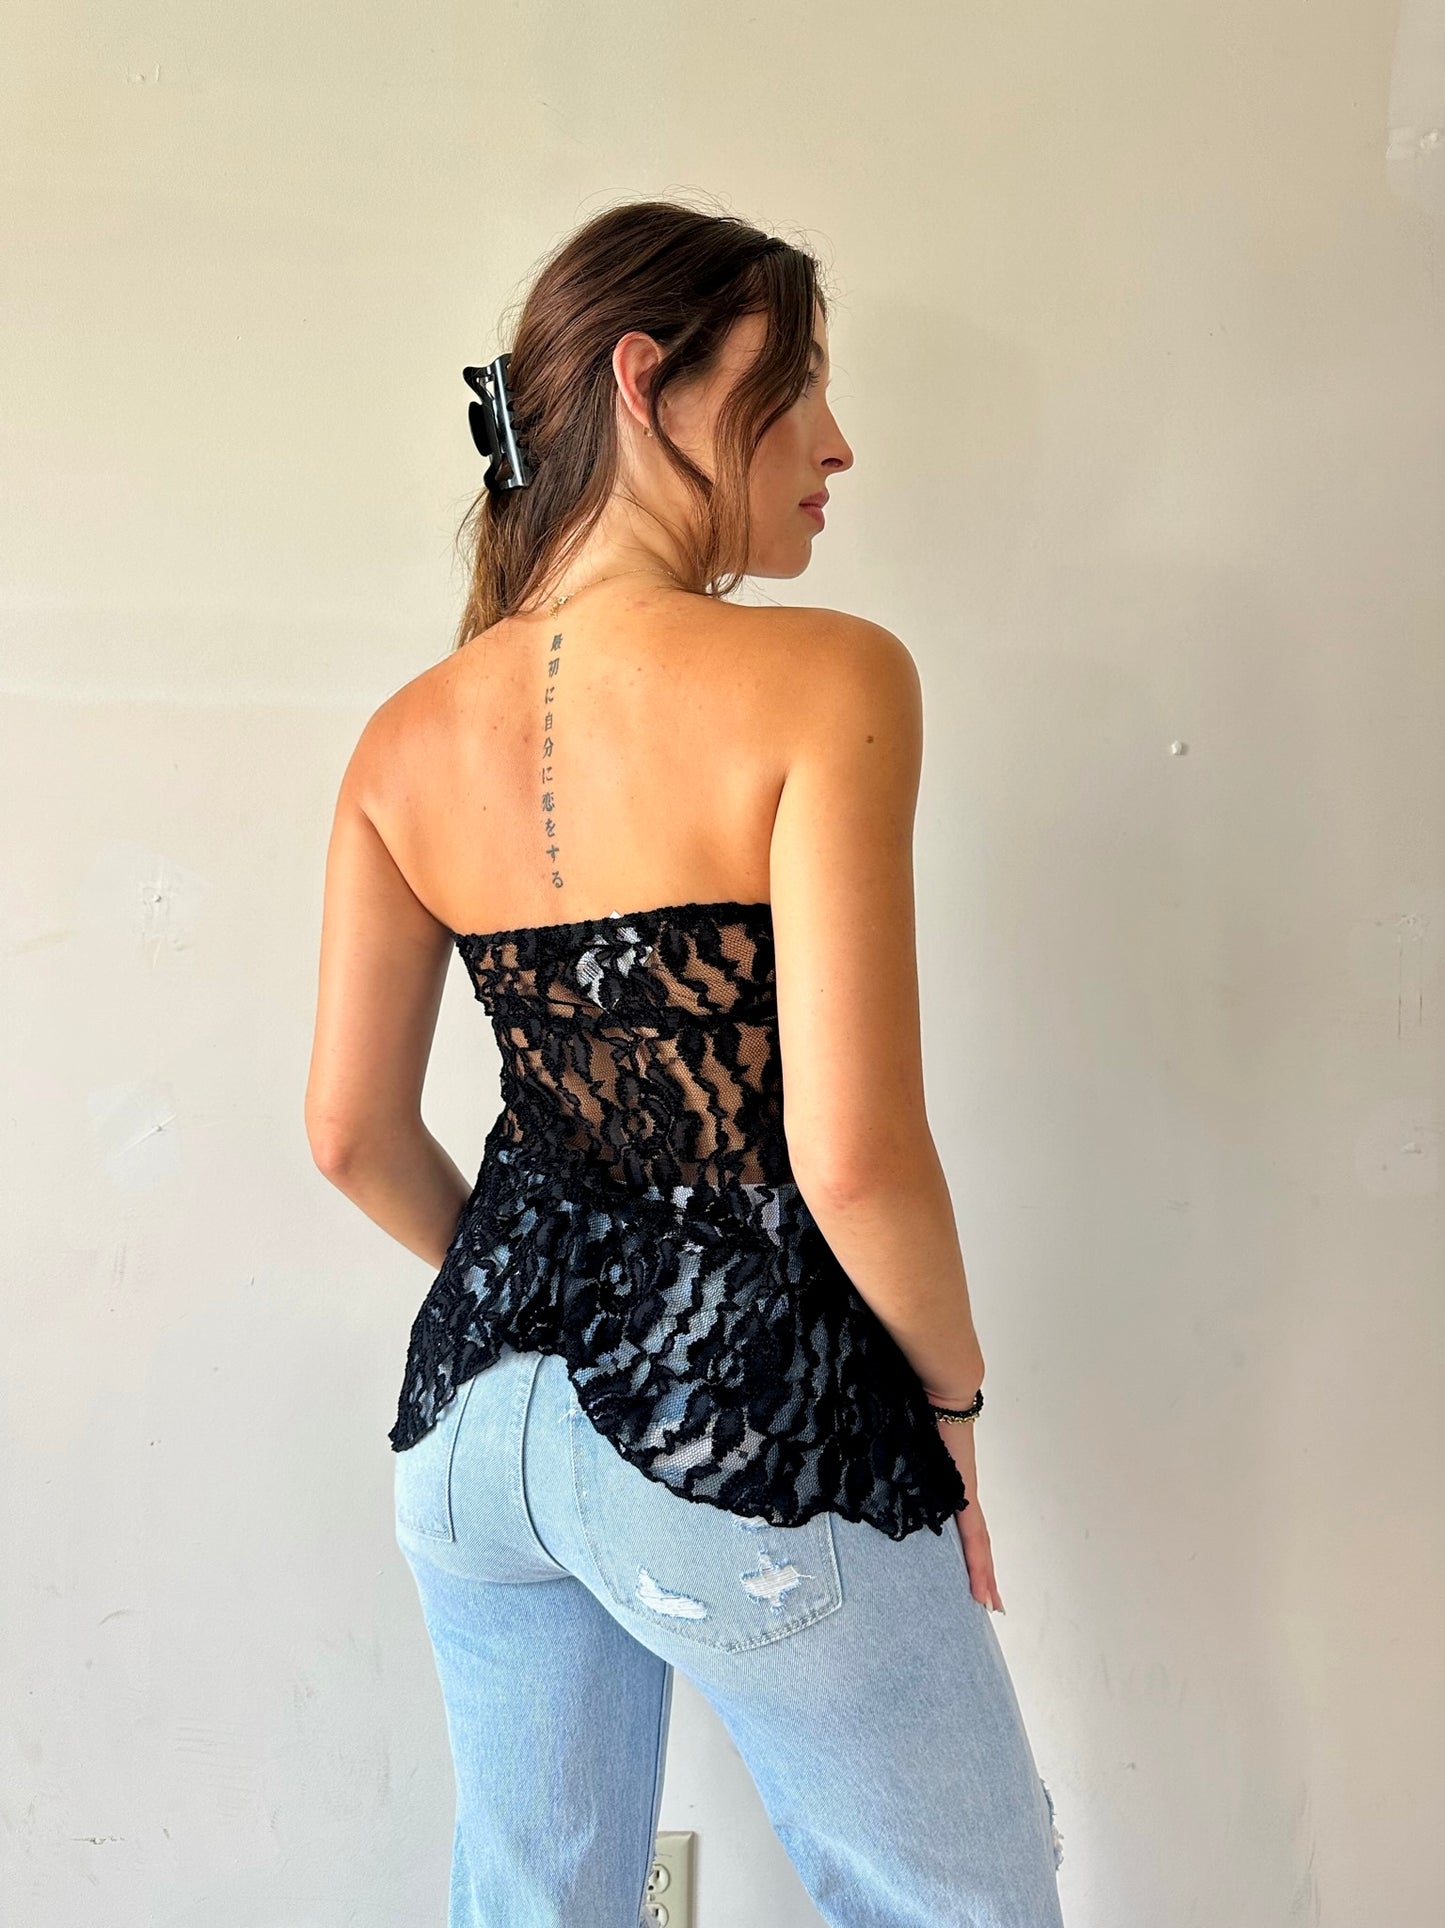 Bryce Canyon Lace Top